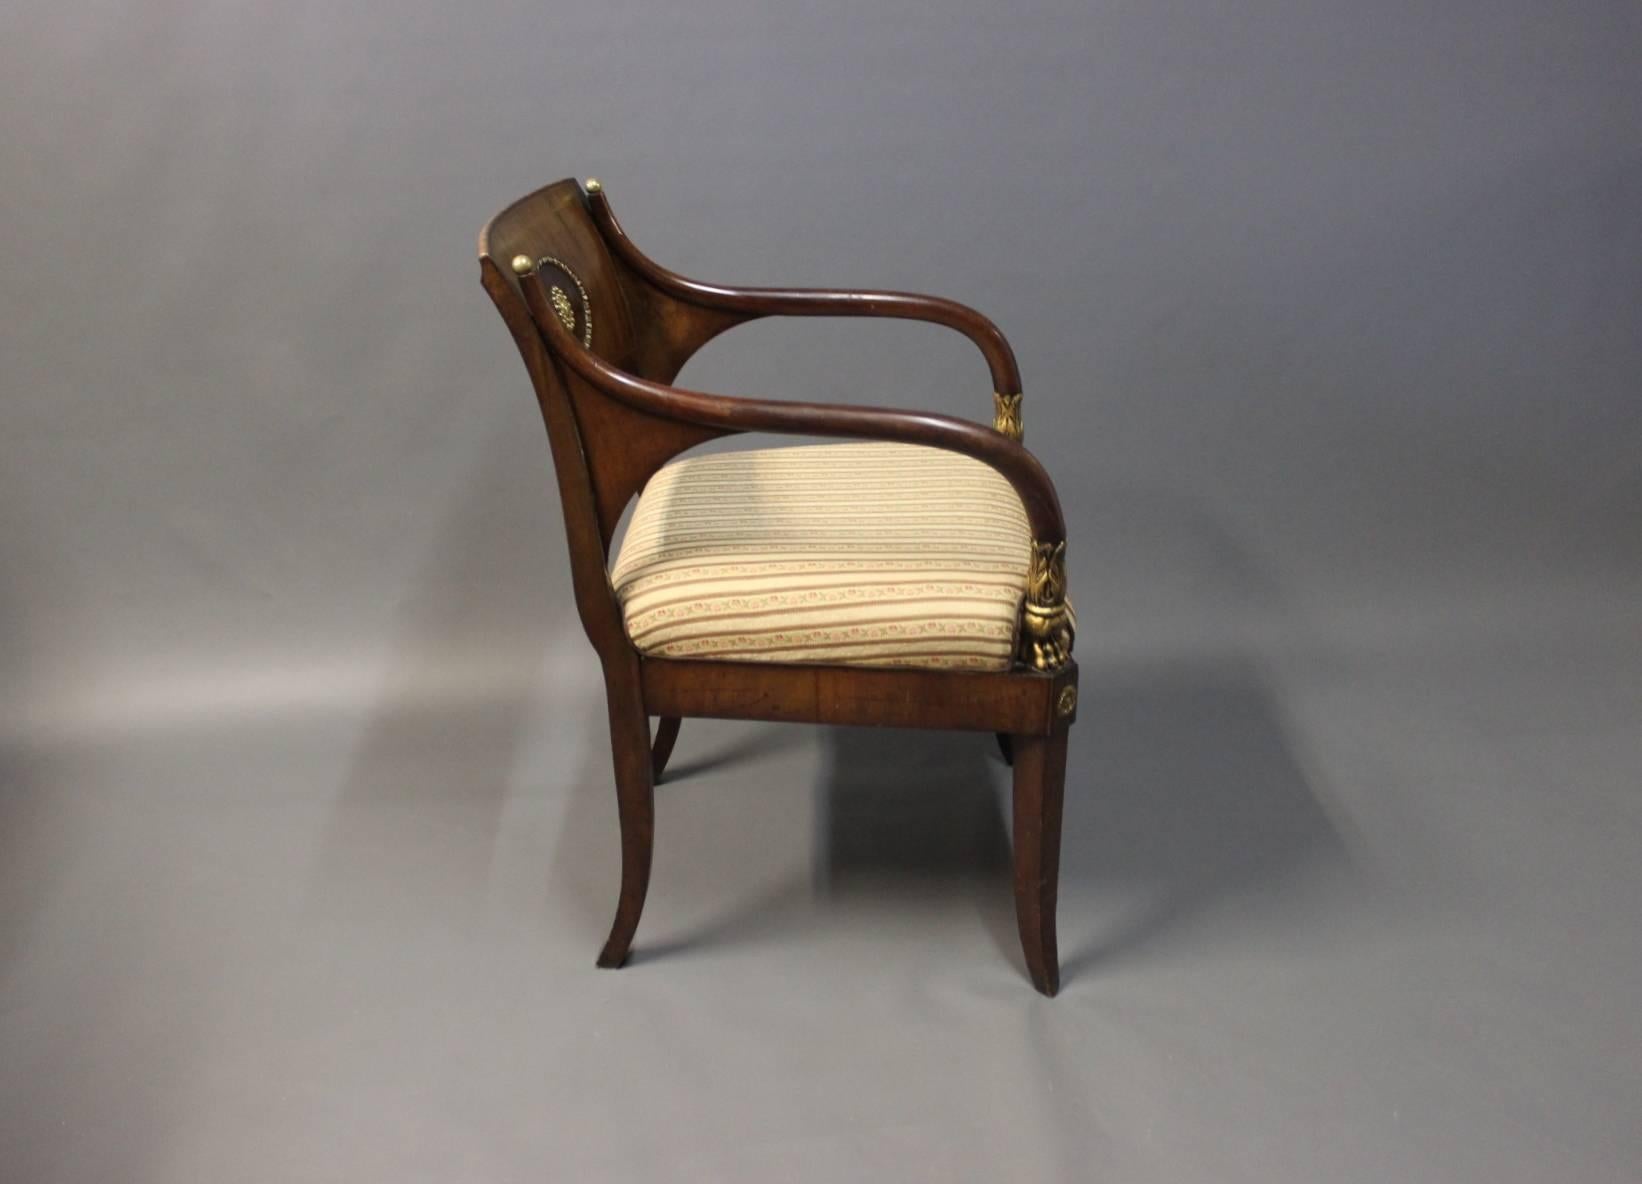 Armchair in polished mahogany, inlaid fruitwood and decorated with brass and leaf gold. The chair was made in Germany in 1830 and upholstered in light fabric.